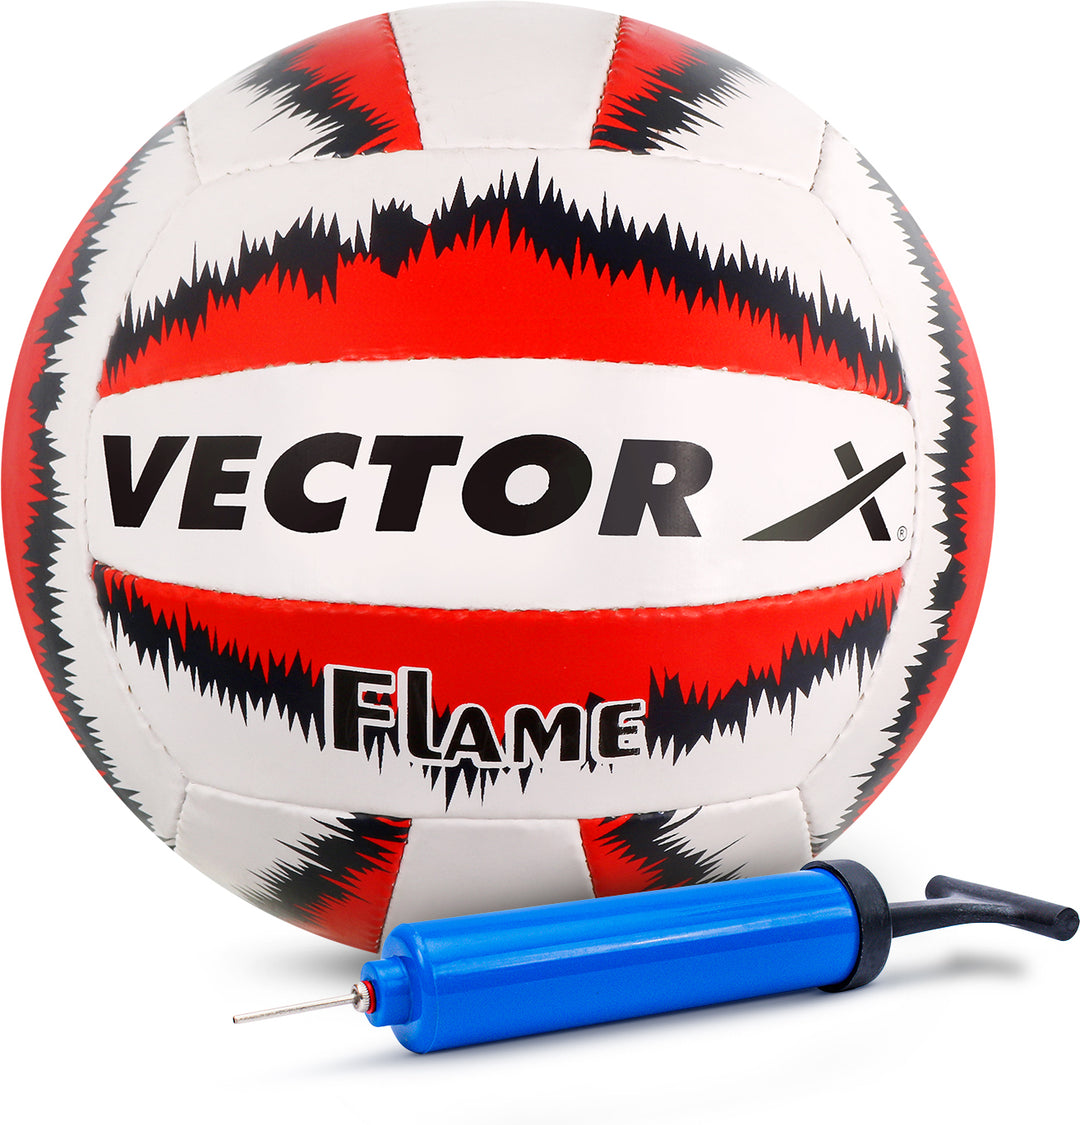 FLAME With Pump Volleyball - Size: 4 (Pack of 1) (Red)